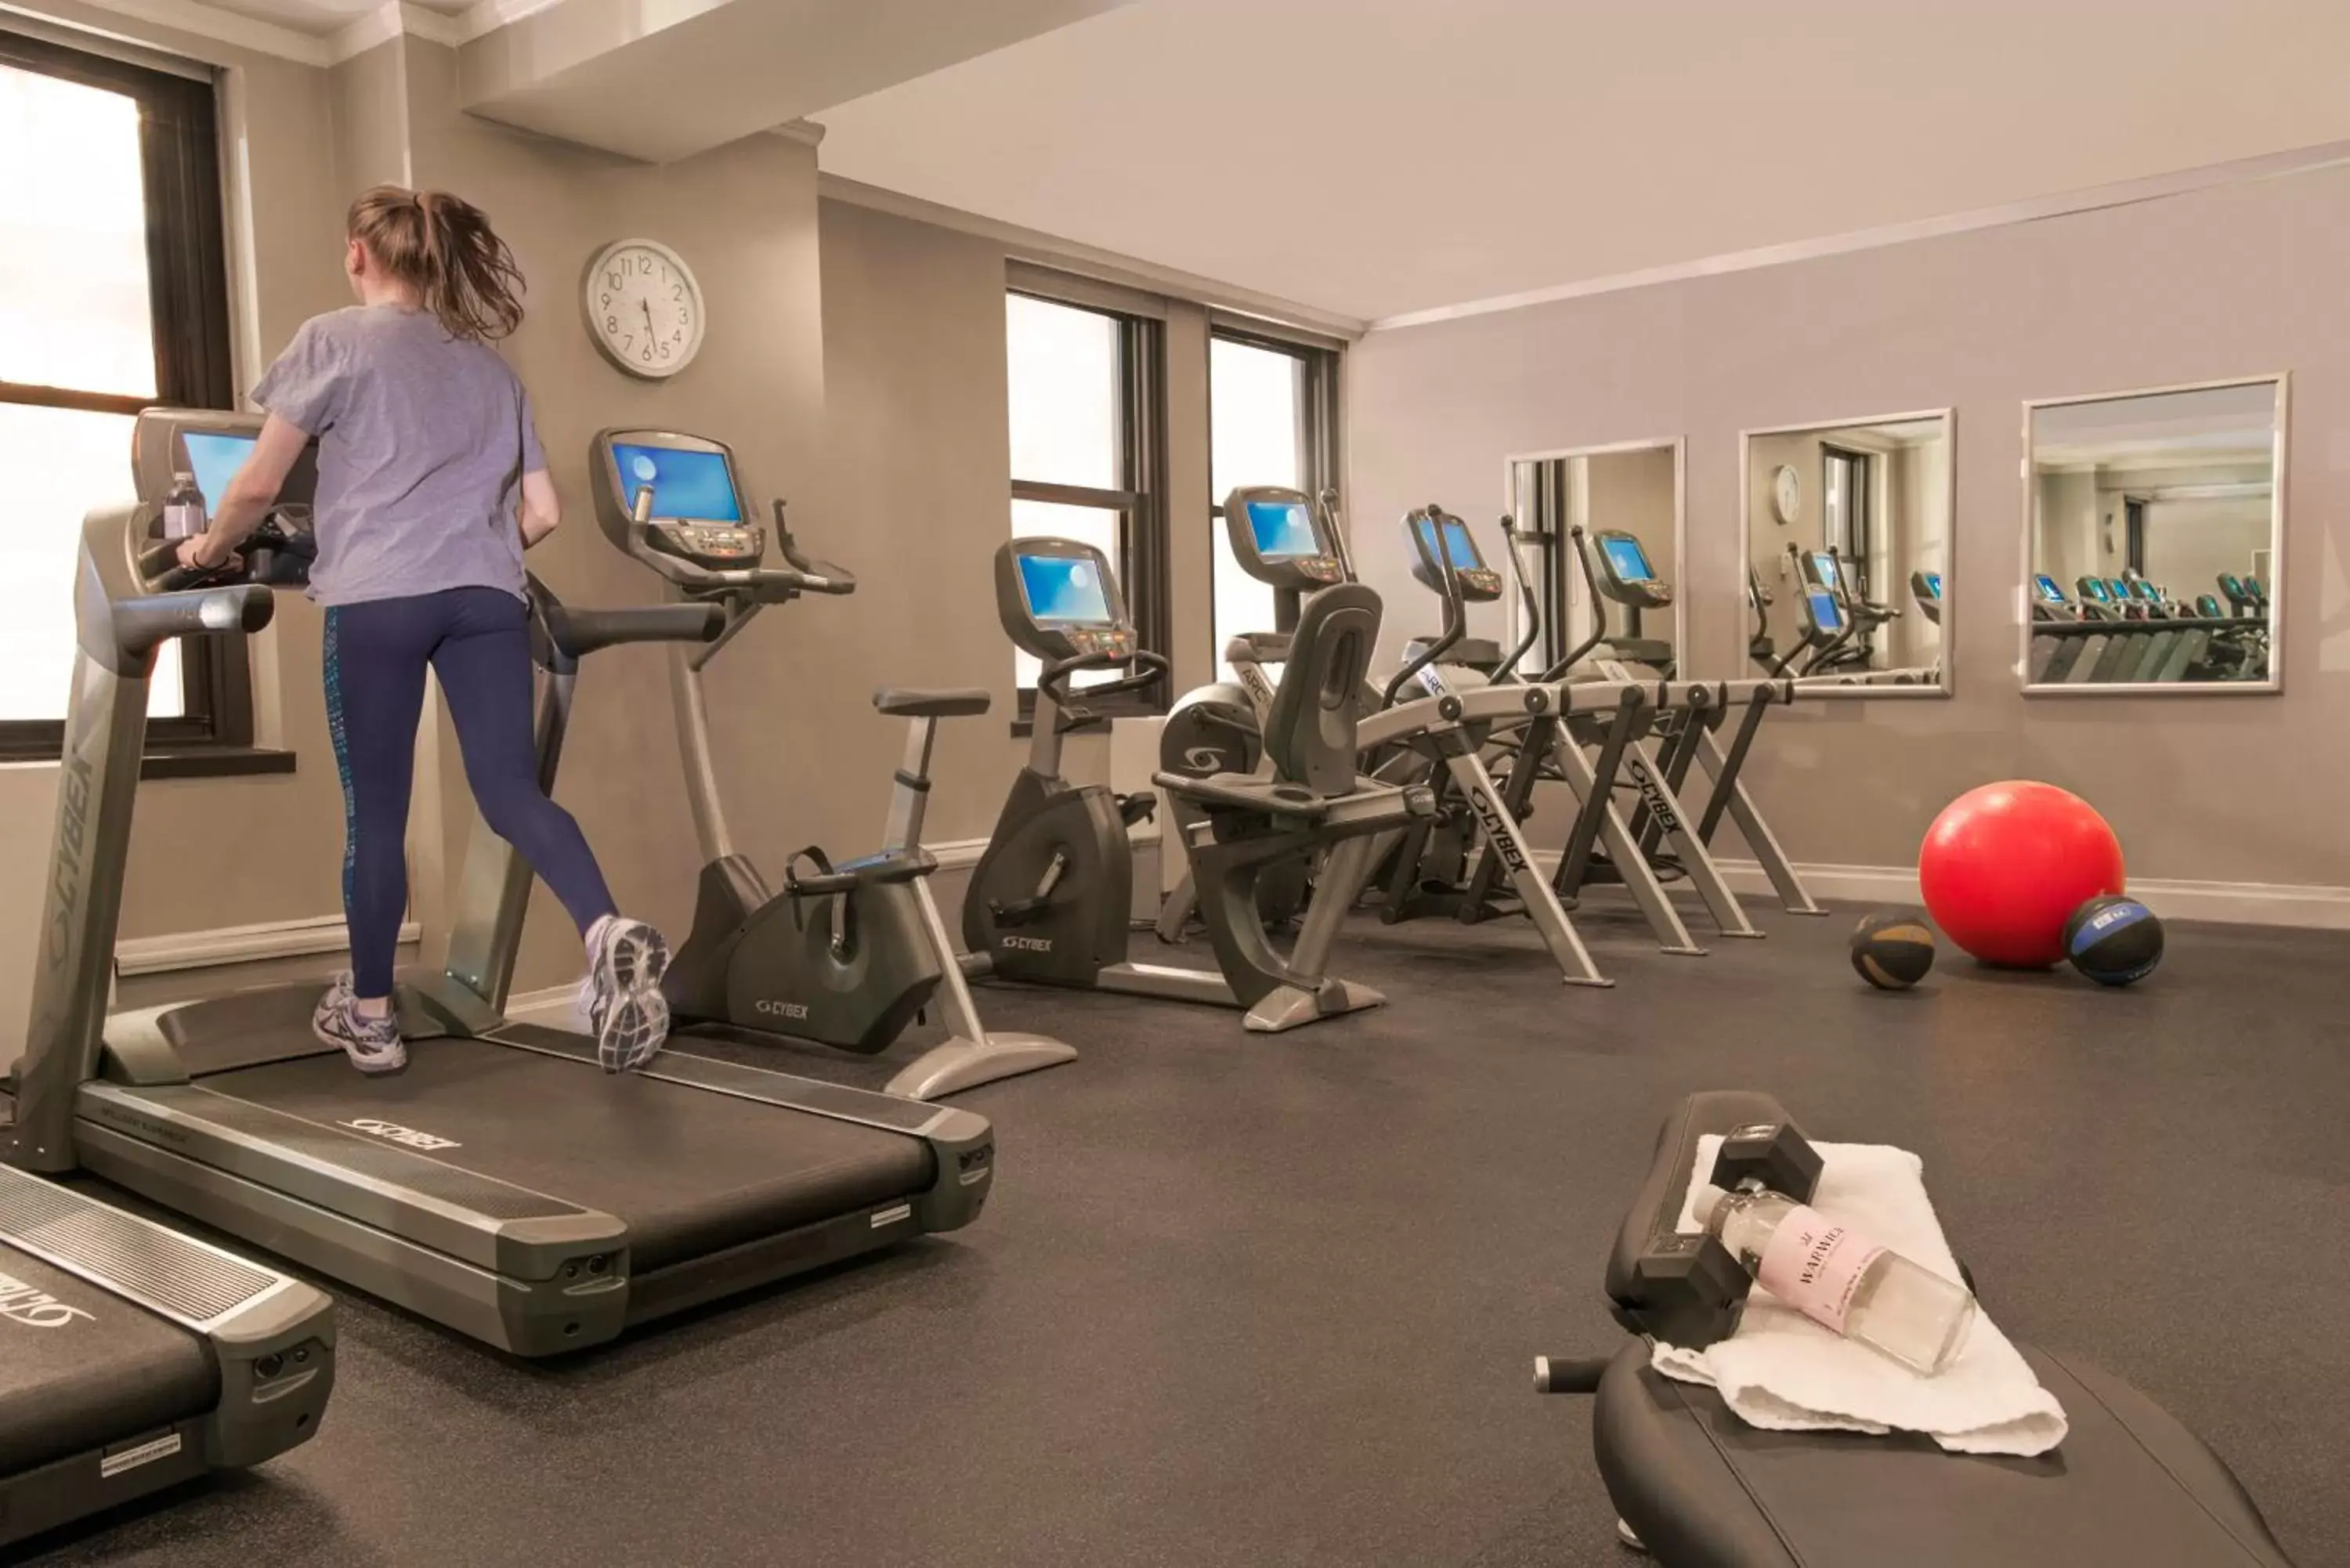 Fitness centre/facilities in Warwick New York